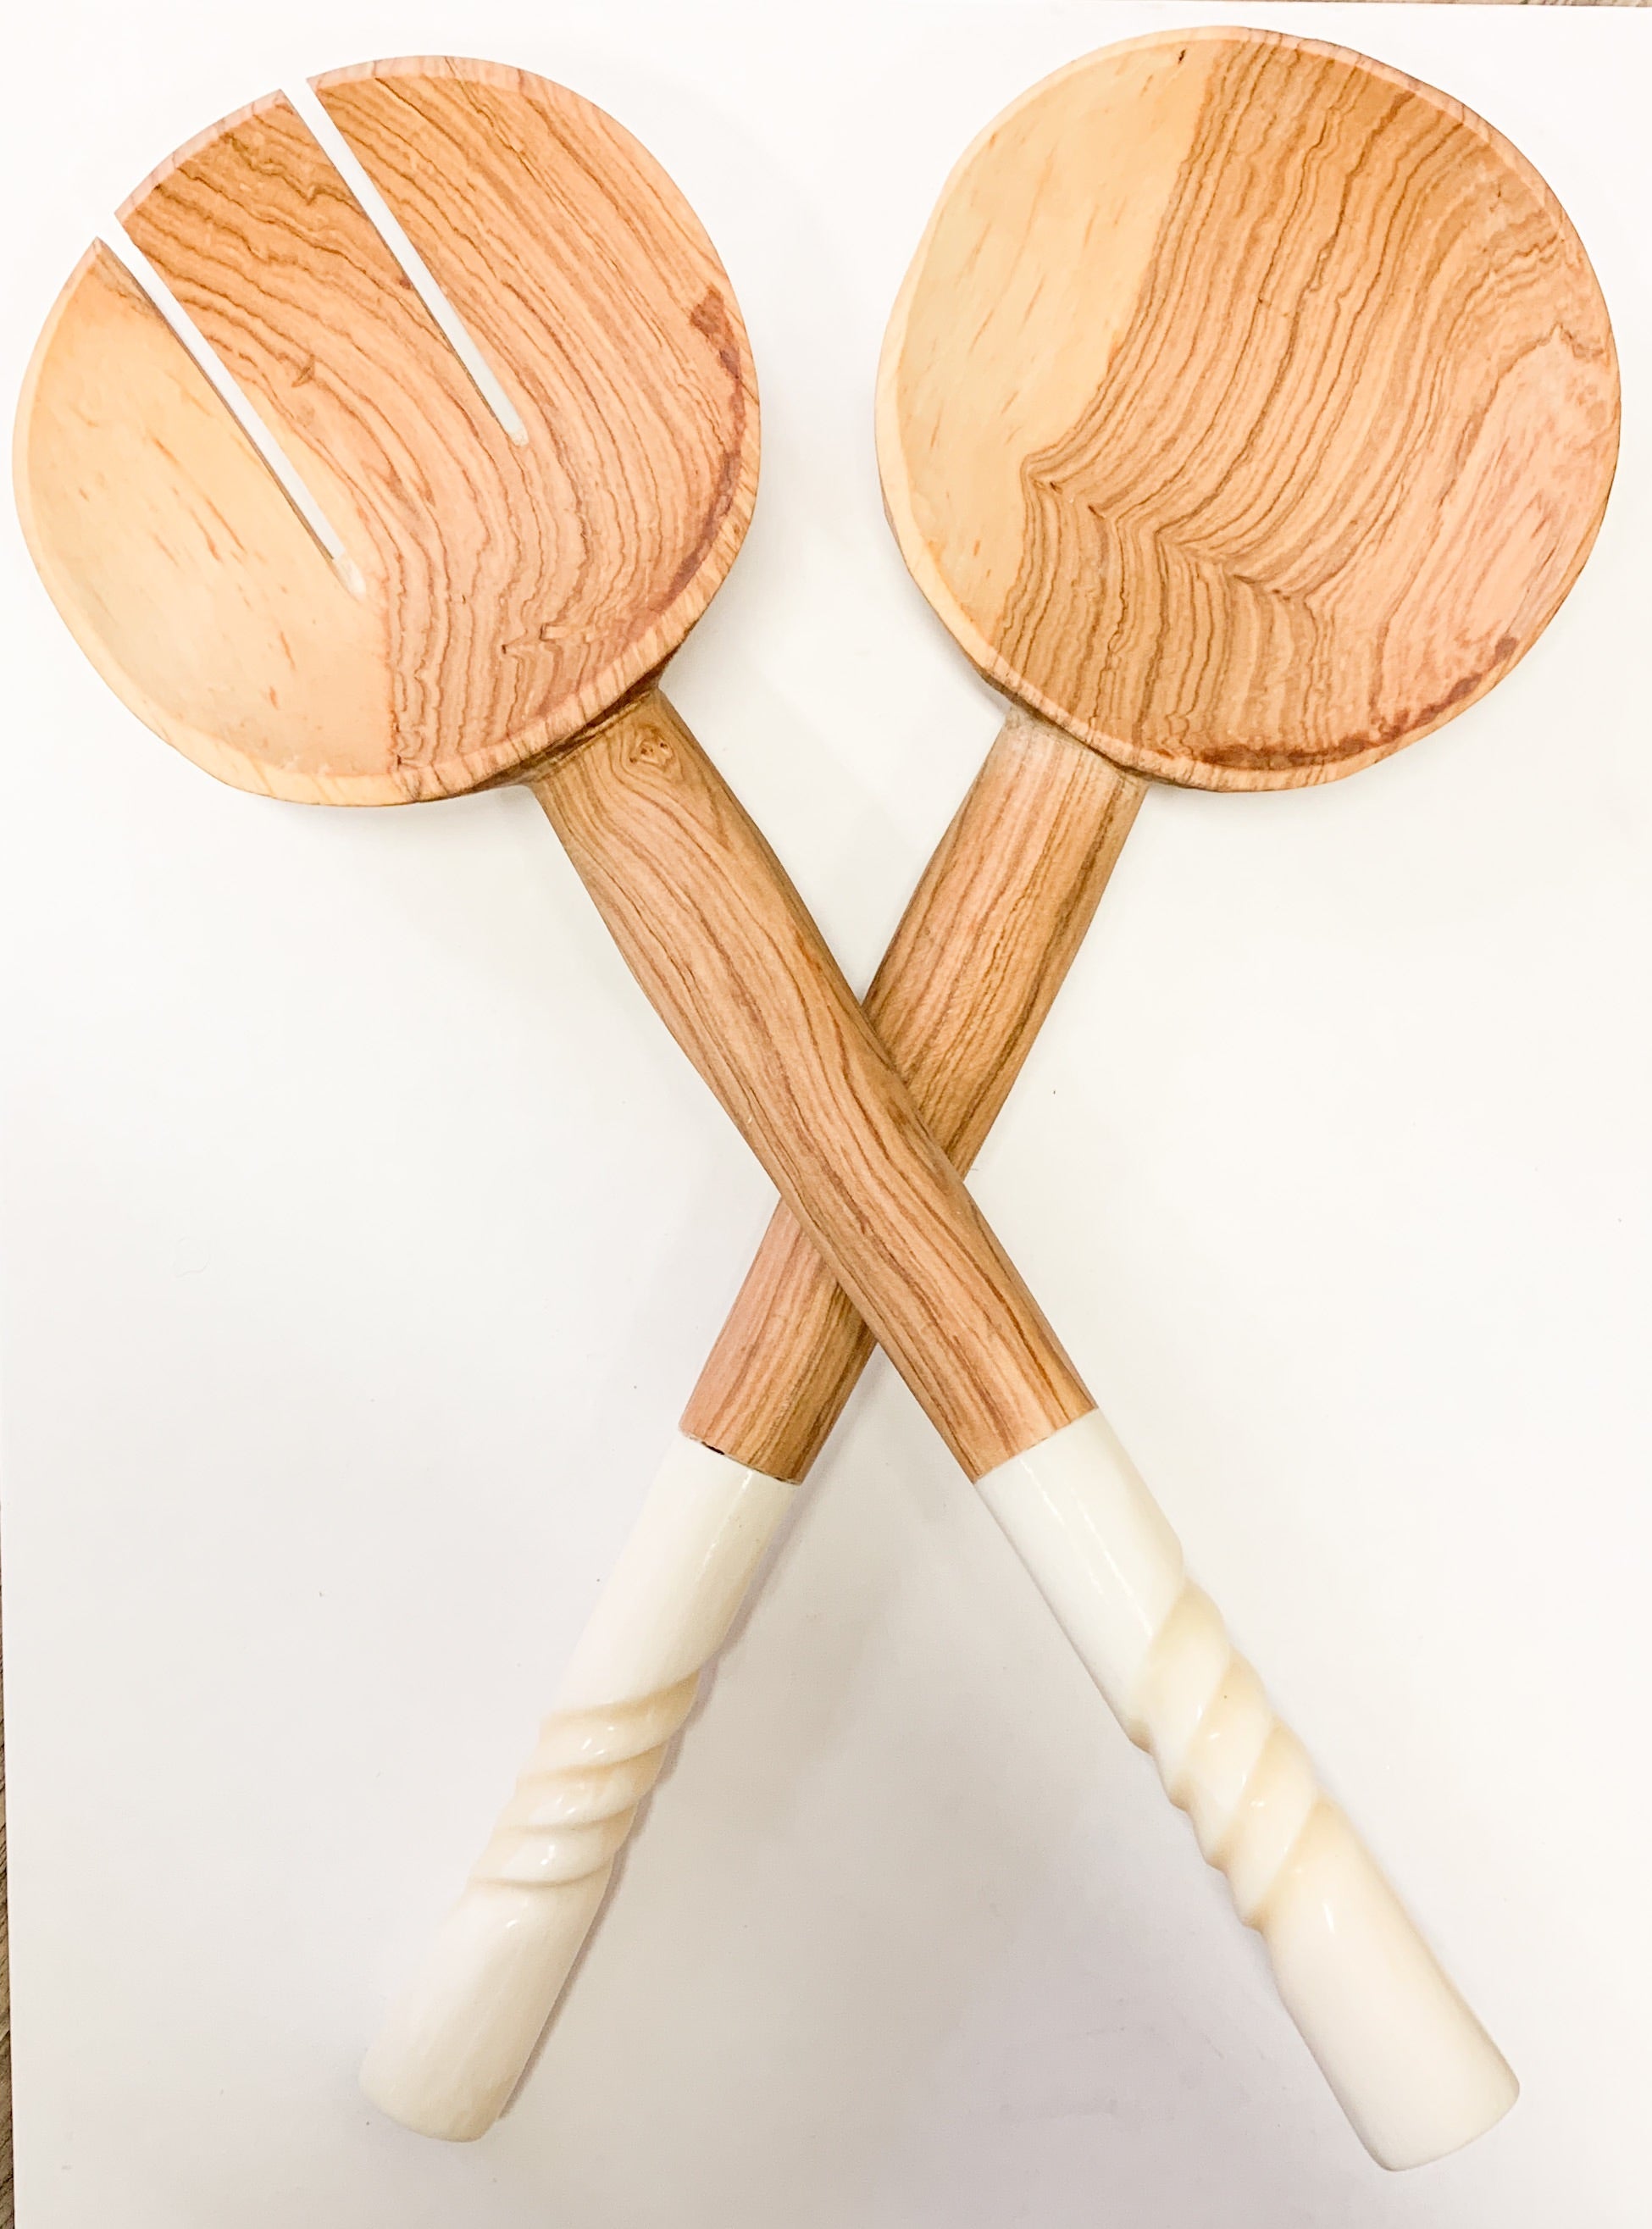 JustOne's handcrafted wooden salad spoons with handles made from ethically sourced bone, handcrafted in Kenya